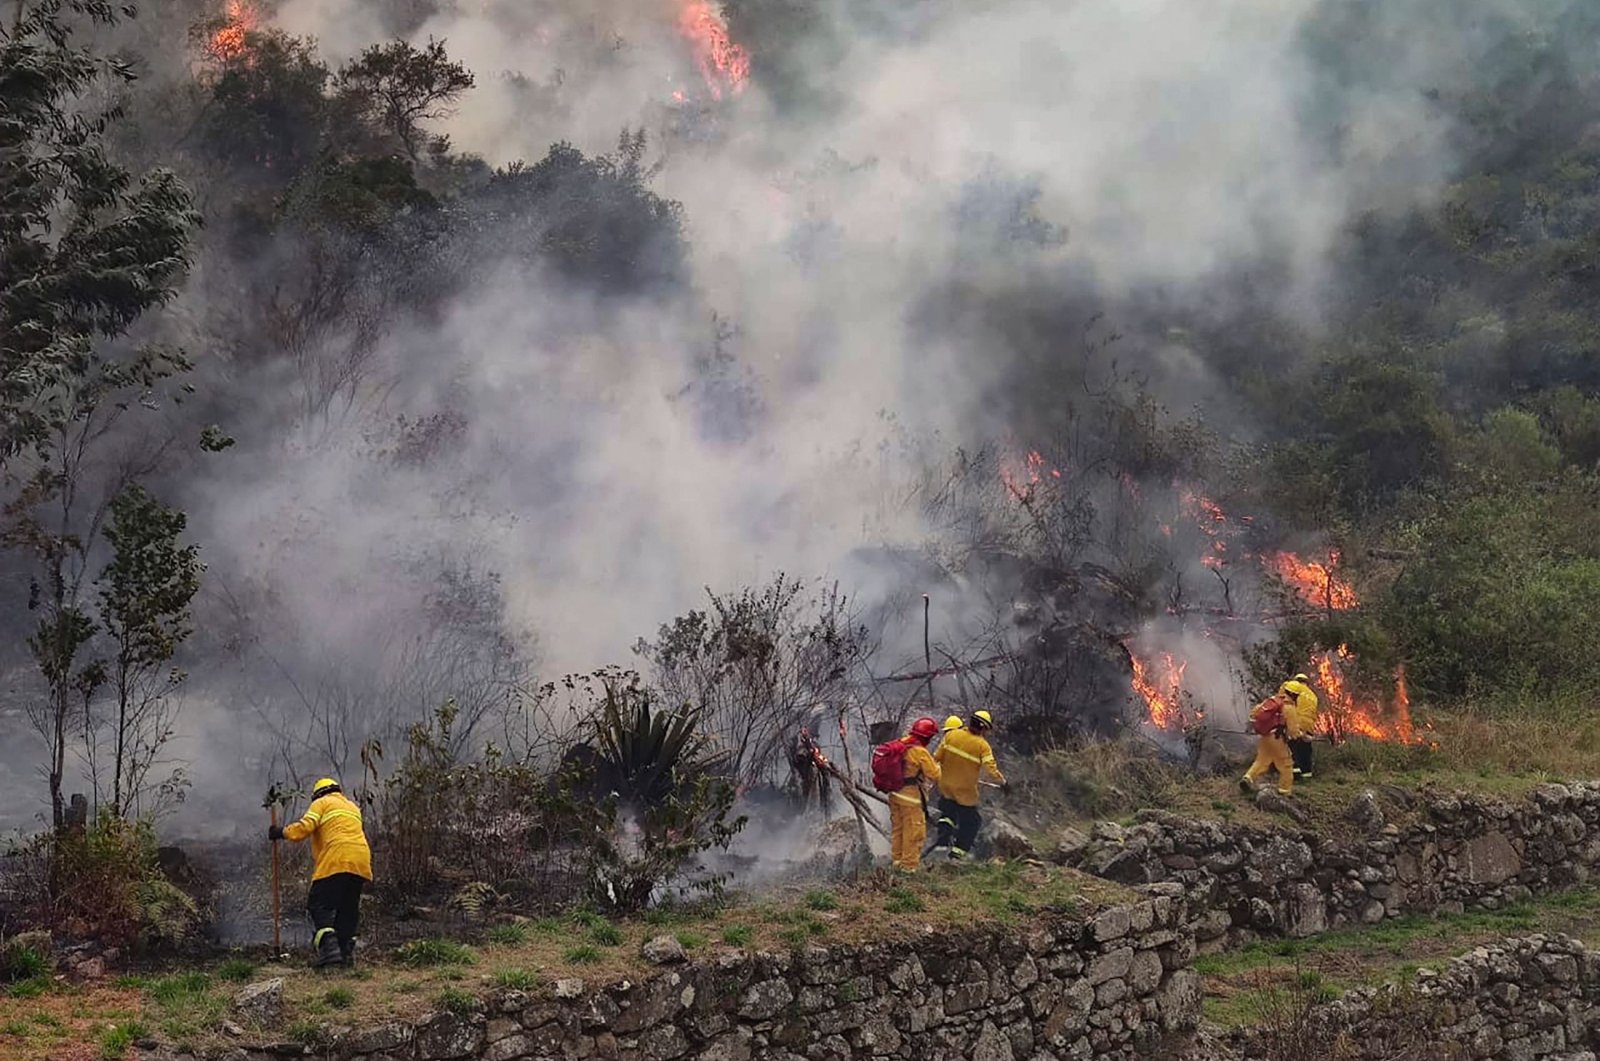 Firefighters are working to put out a fire in the bush surrounding the ruins of Llamakancha, a sector in the archaeological site of Machu Picchu, Peru, June 28, 2022. (Machu Picchu Municipality via AFP)